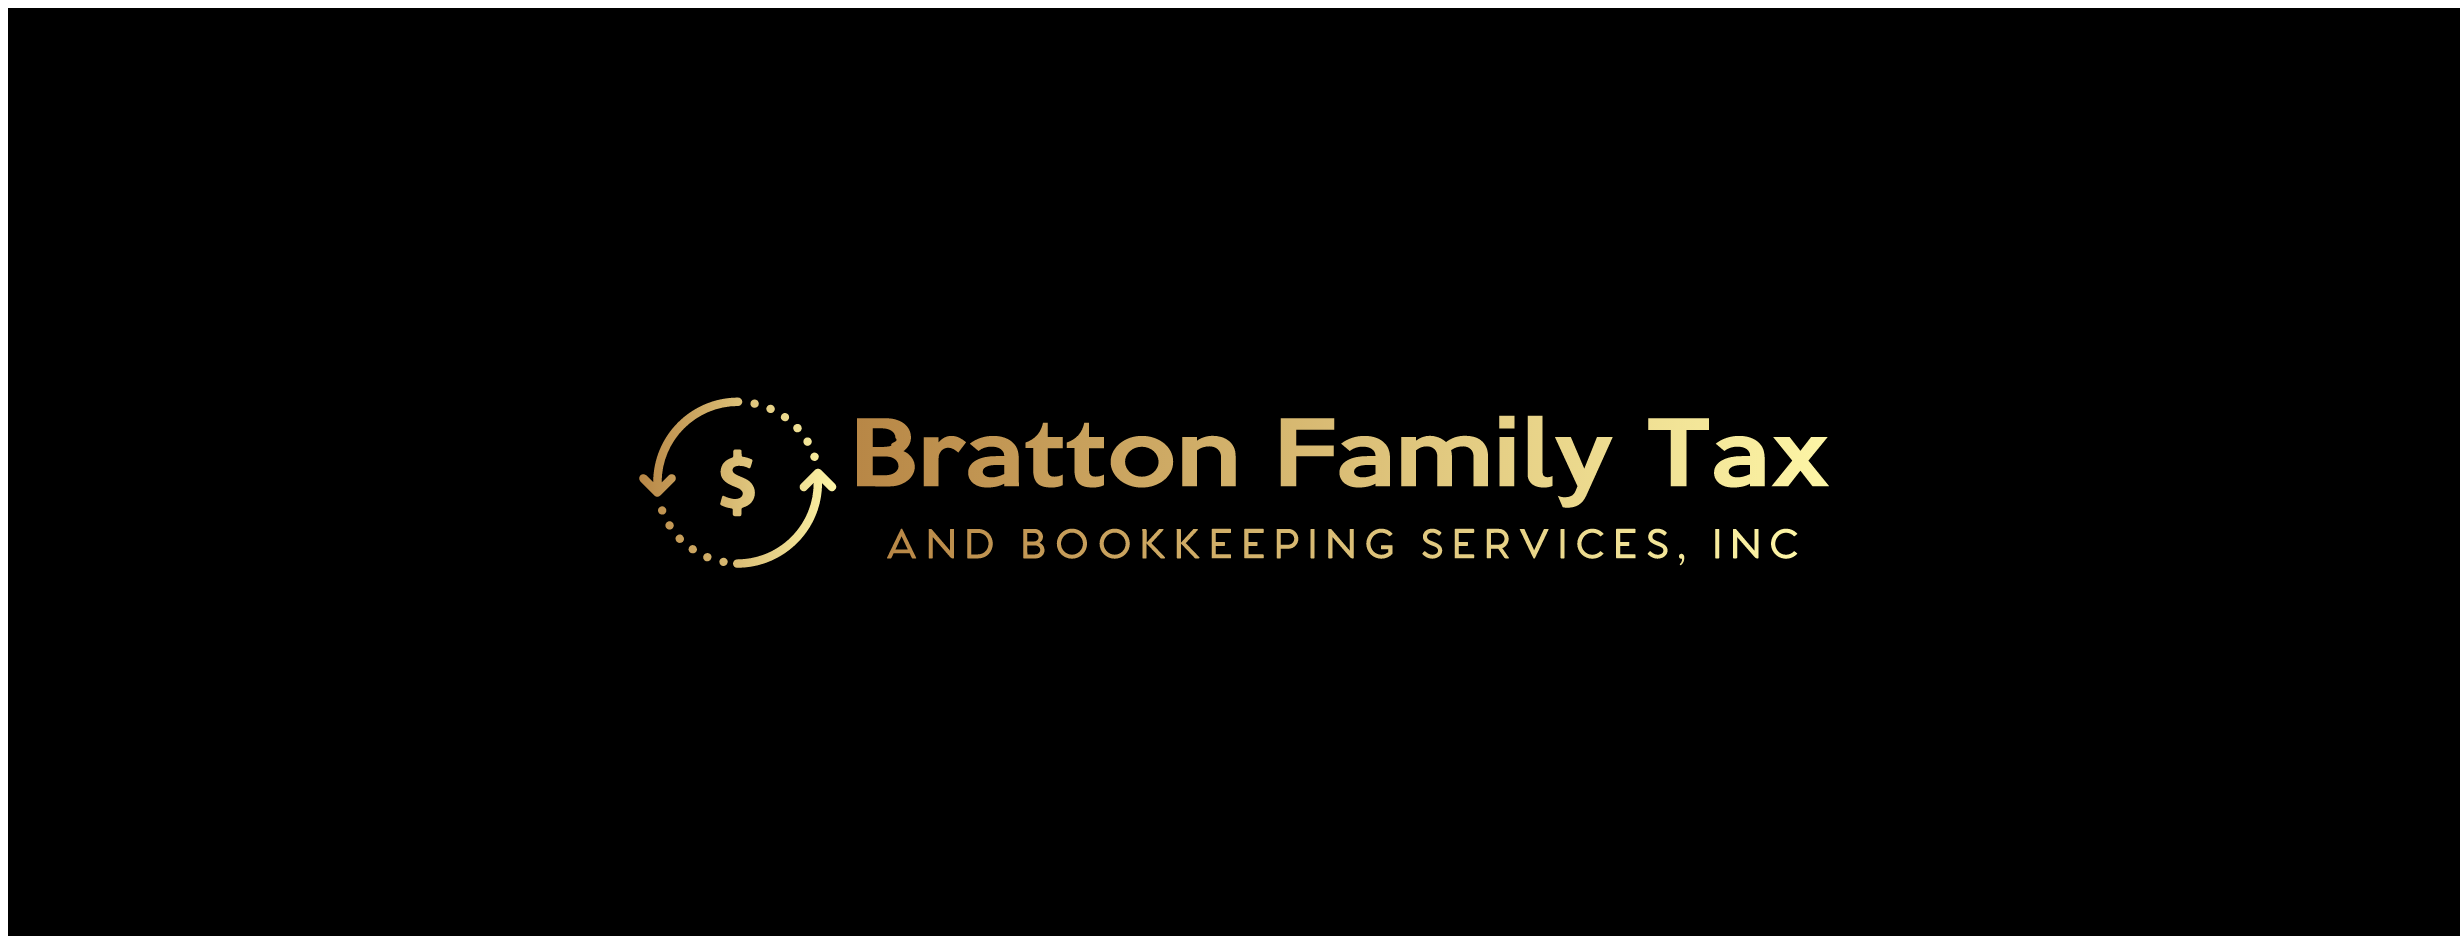 Bratton Family Tax and Bookkeeping Services,Inc.